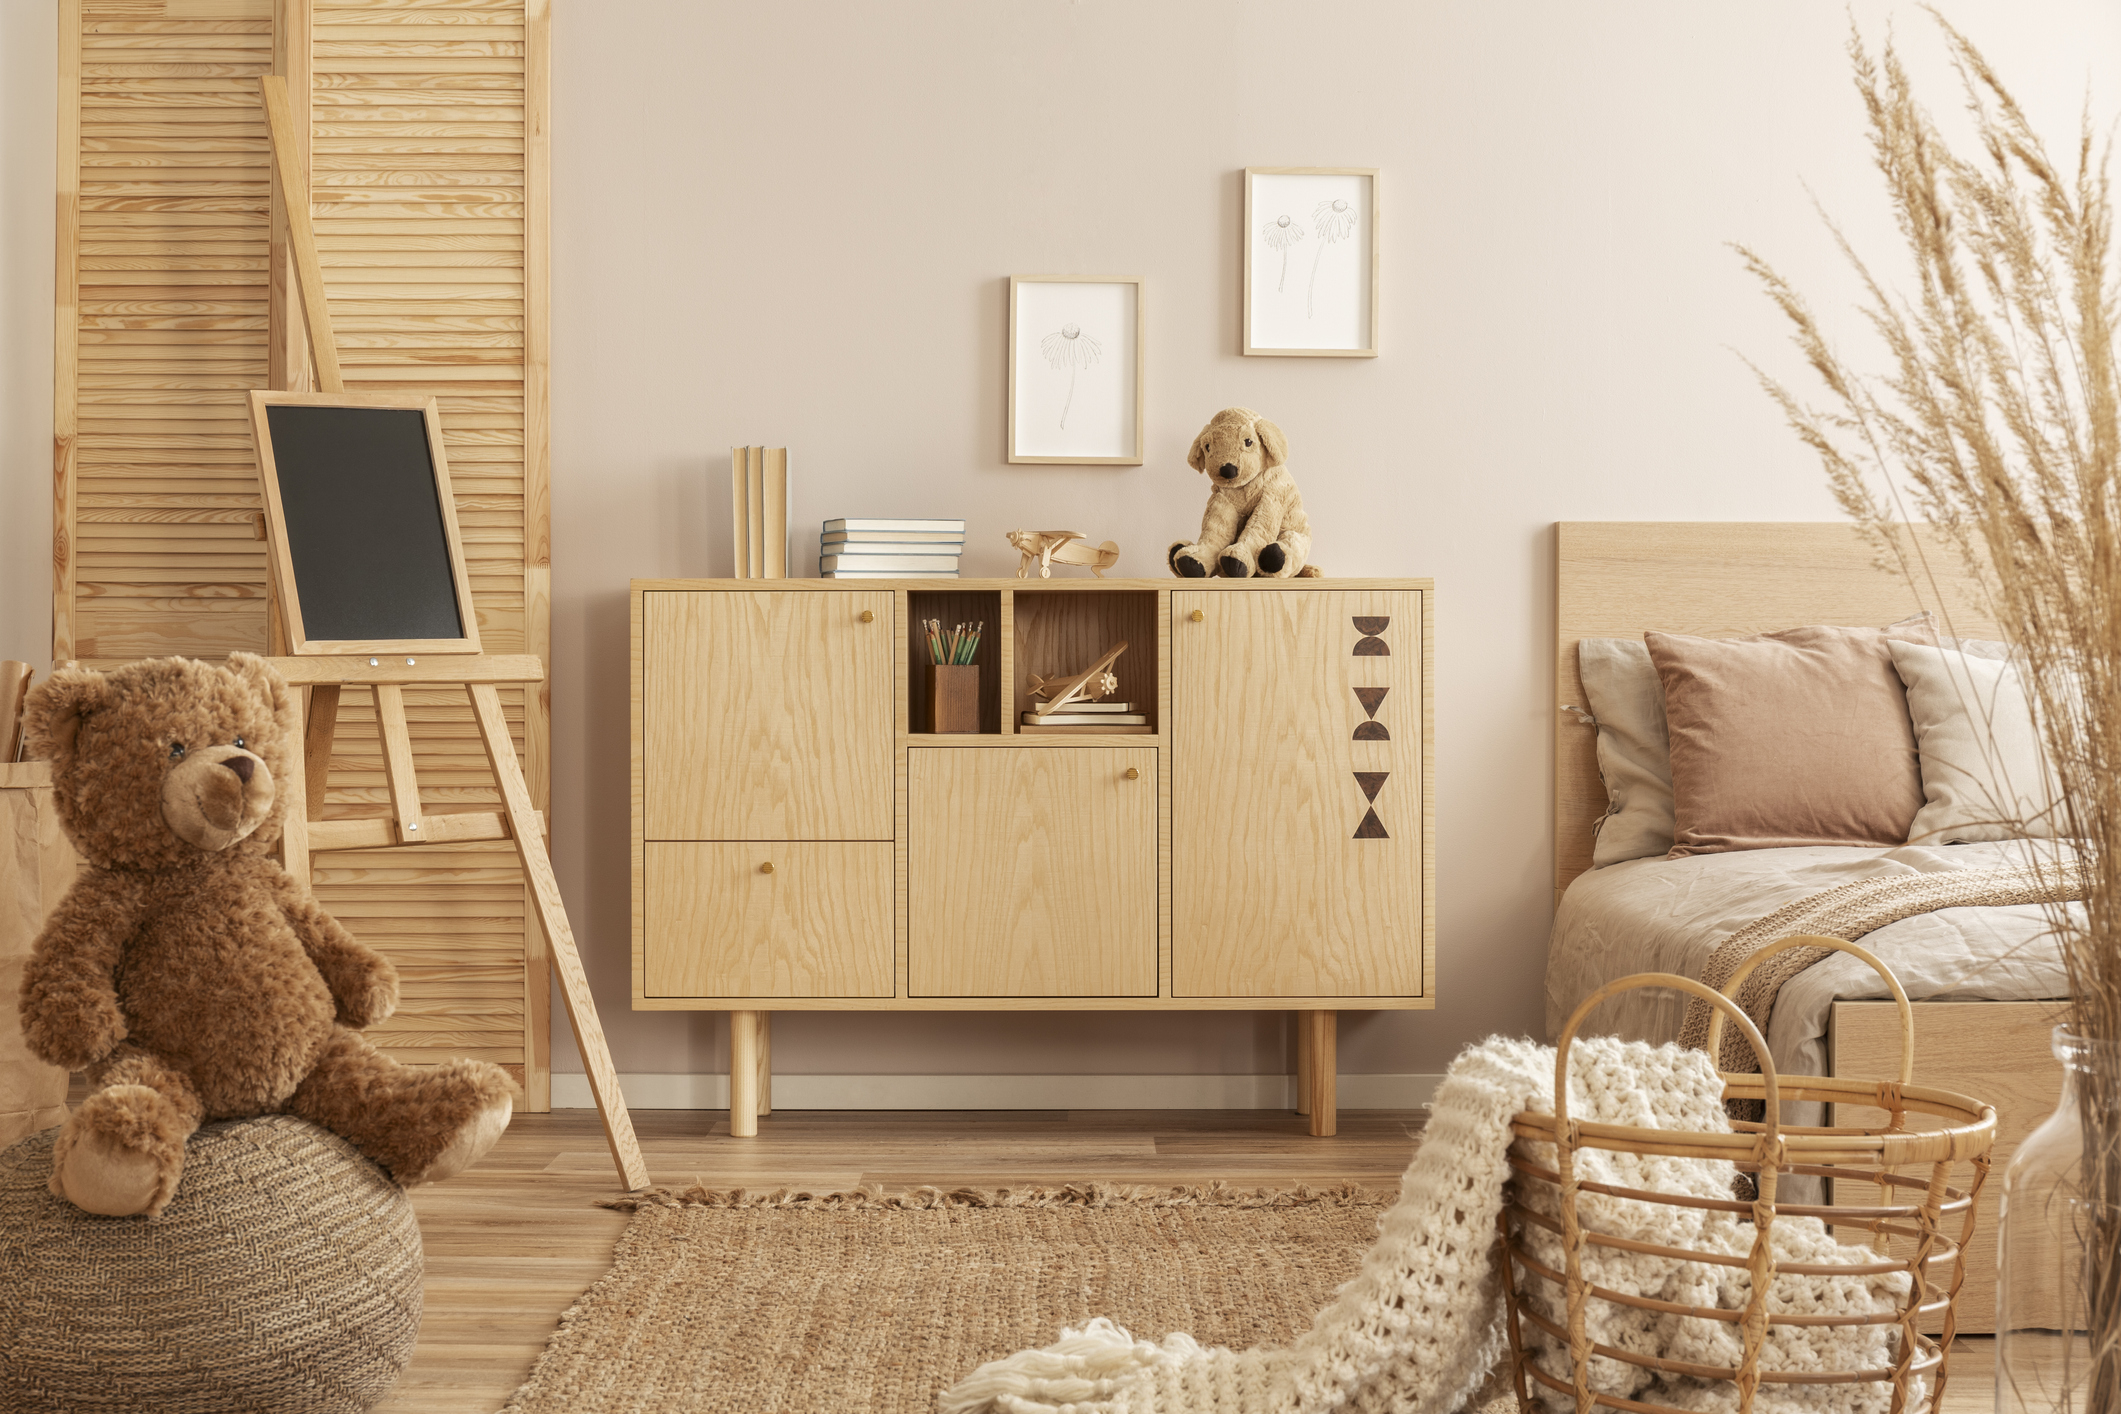 Cozy corner of a room with a wooden cabinet, soft toys, art easel, and cushioned seat with decor